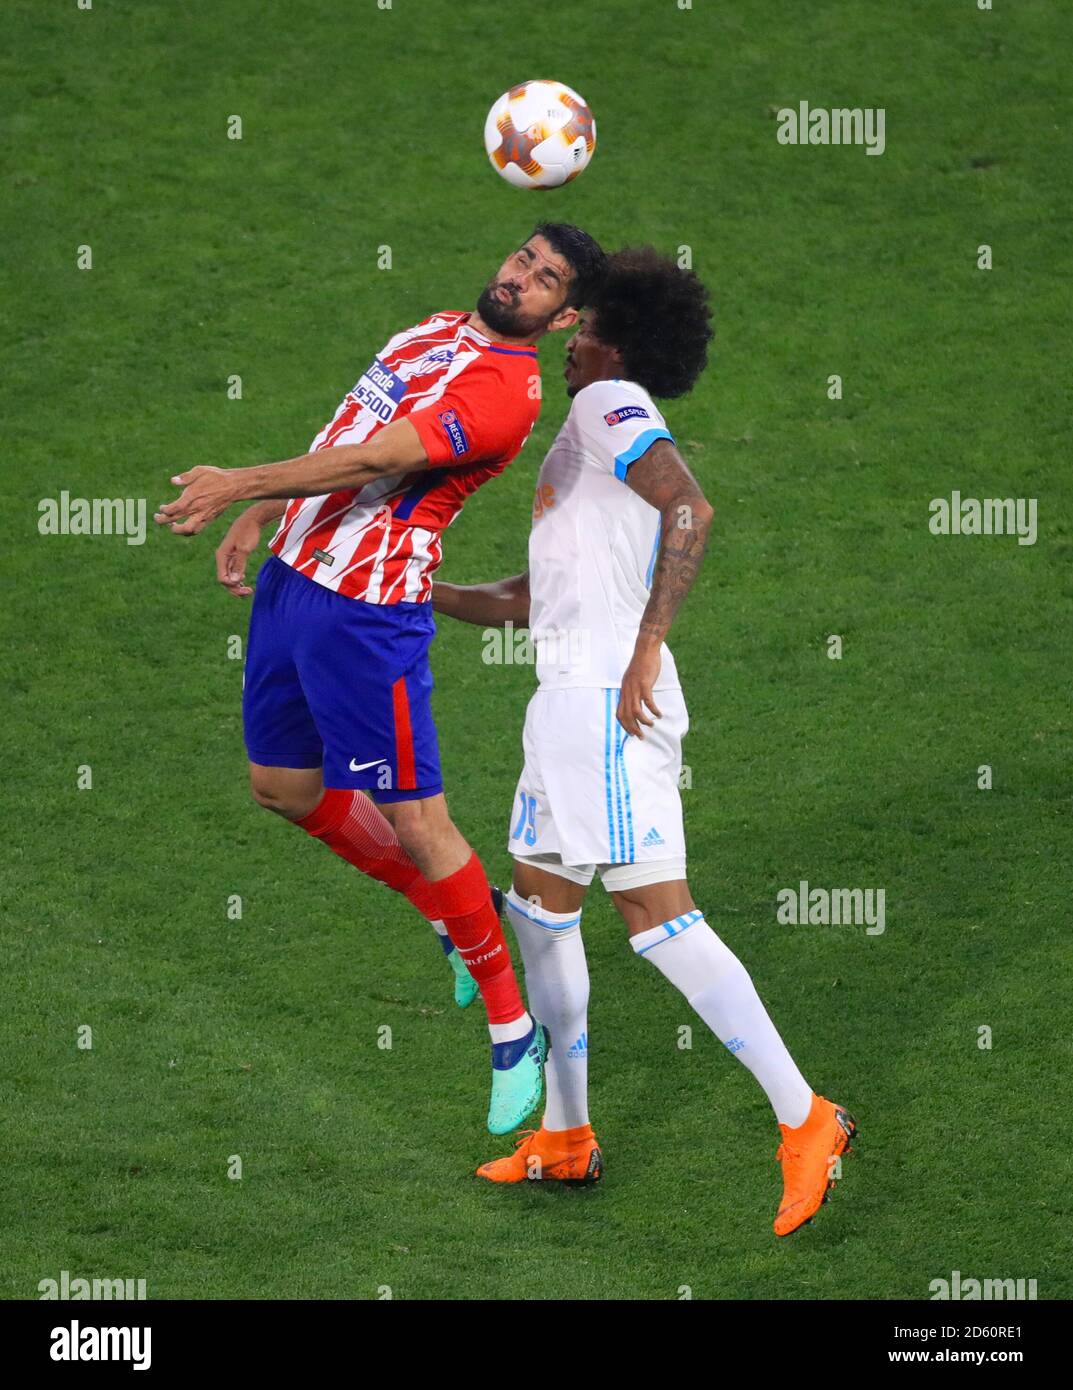 Atletico Madrid's Diego Costa (left) and Marseille's Luiz Gustavo battle for the ball Stock Photo